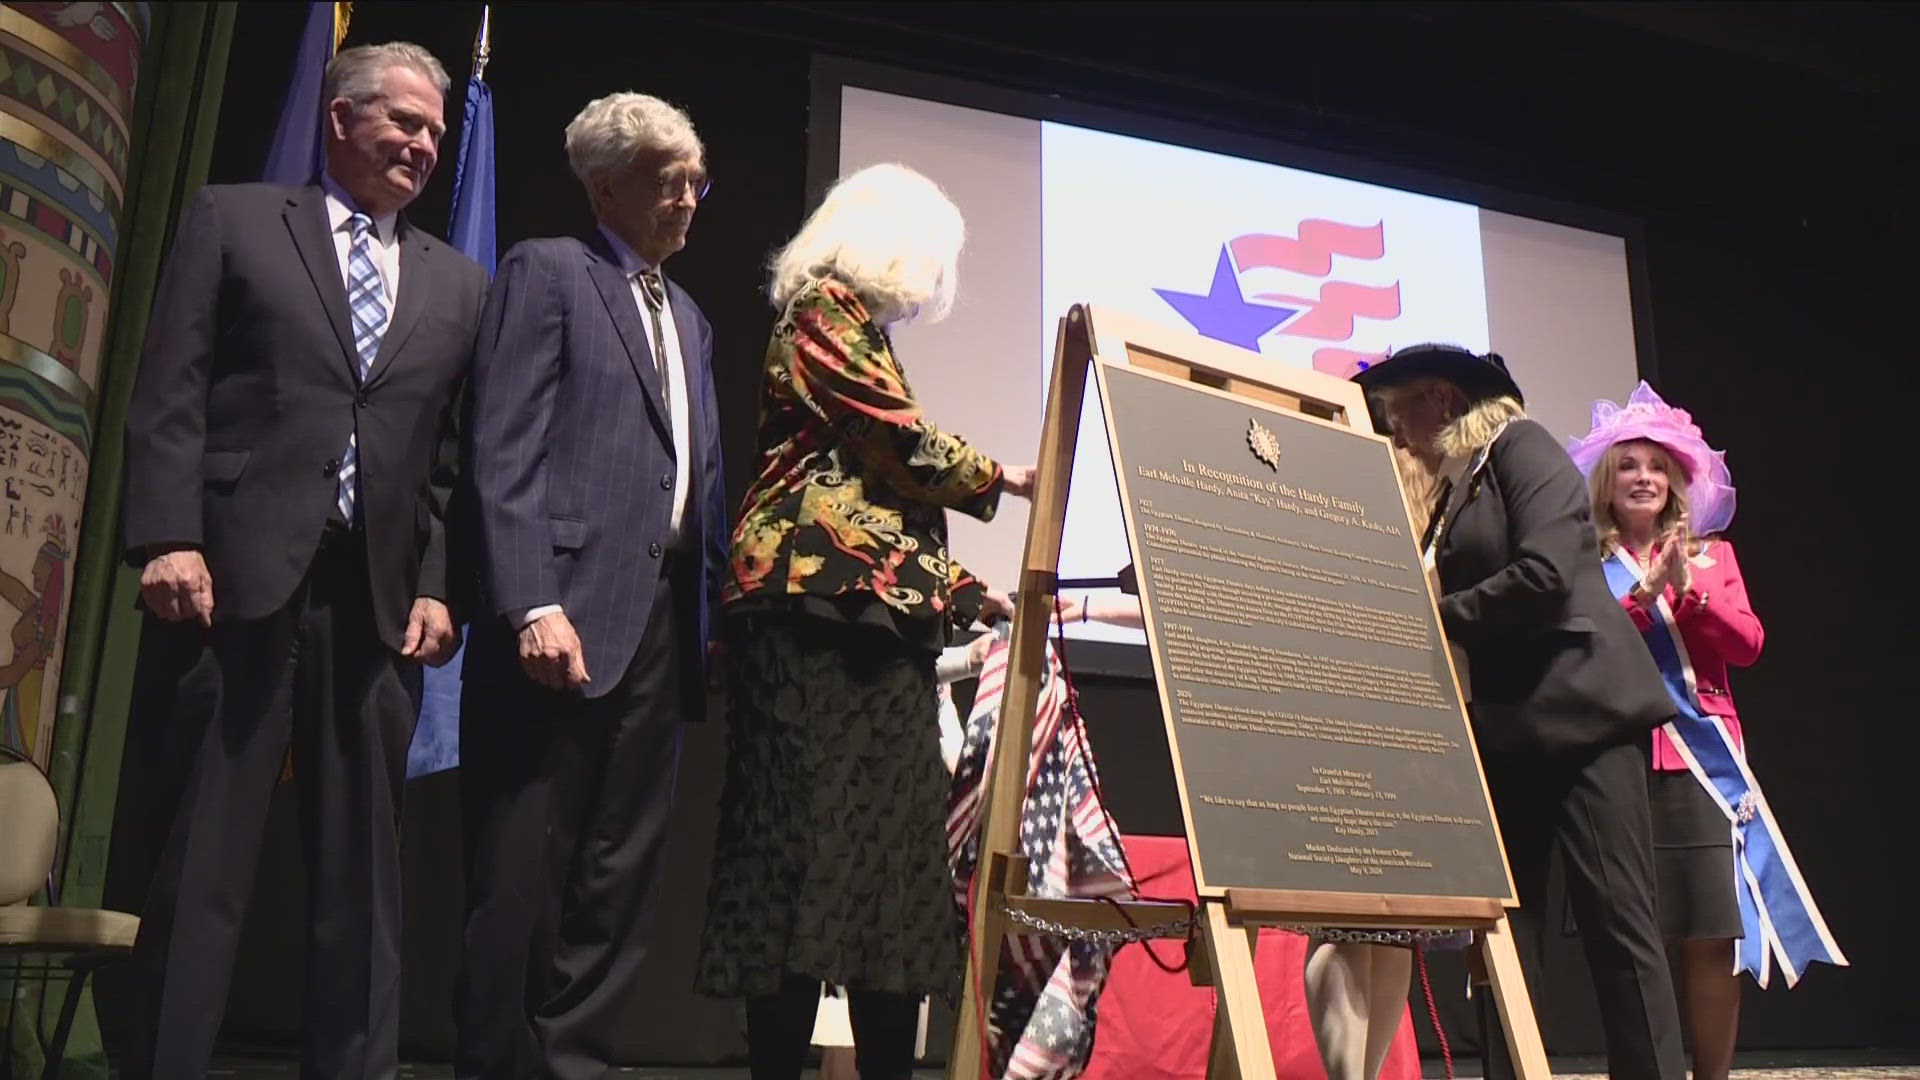 The Daughters of the American Revolution honored the owners of the Egyptian Movie Theatre.